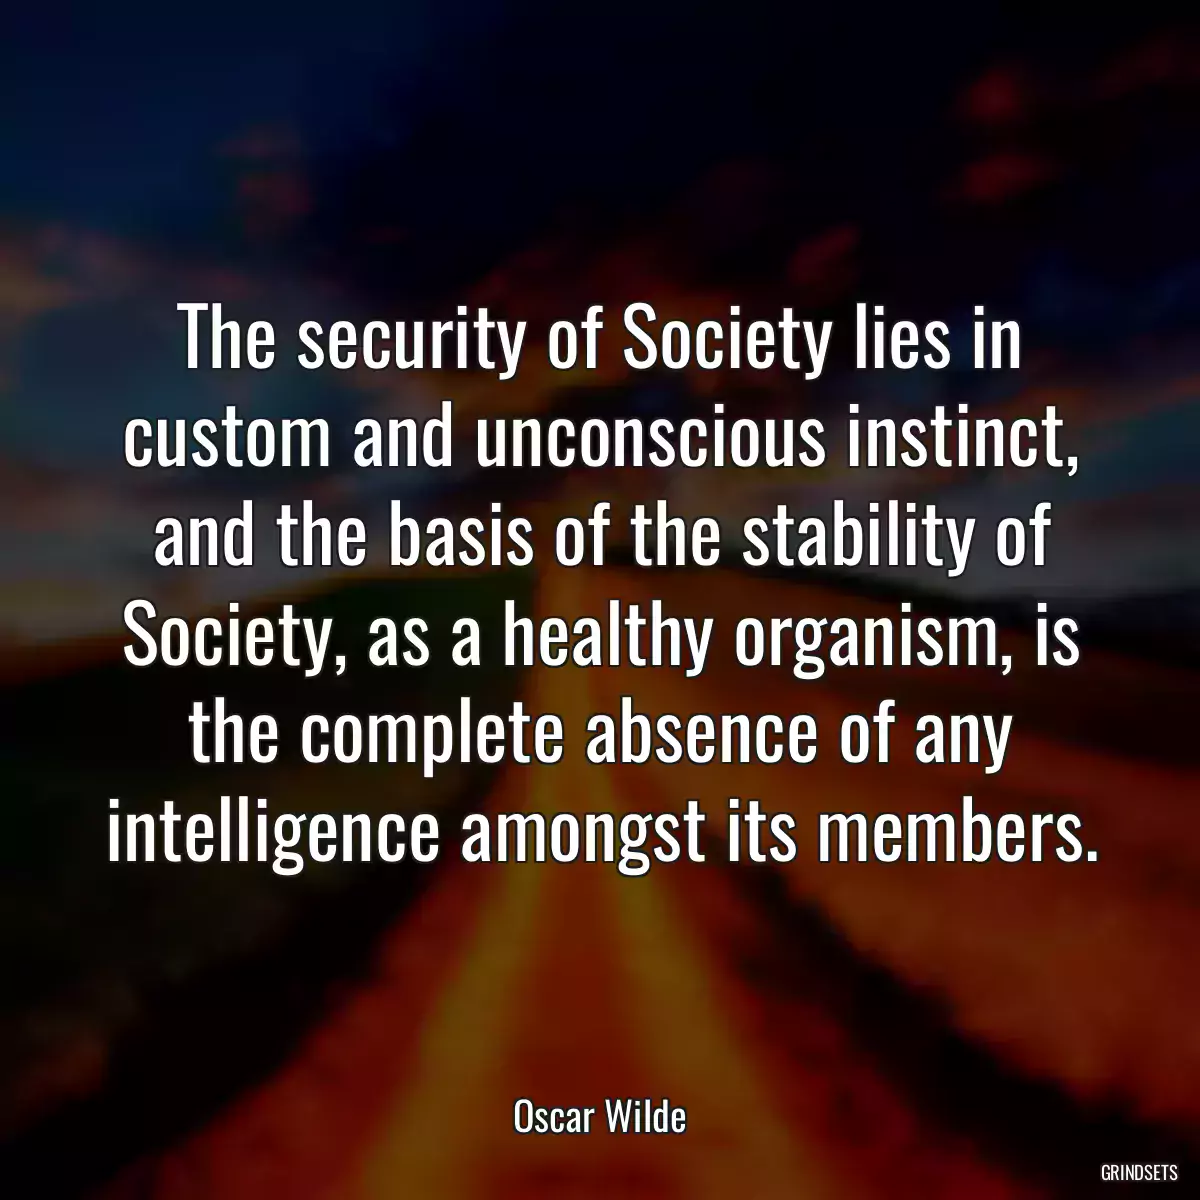 The security of Society lies in custom and unconscious instinct, and the basis of the stability of Society, as a healthy organism, is the complete absence of any intelligence amongst its members.